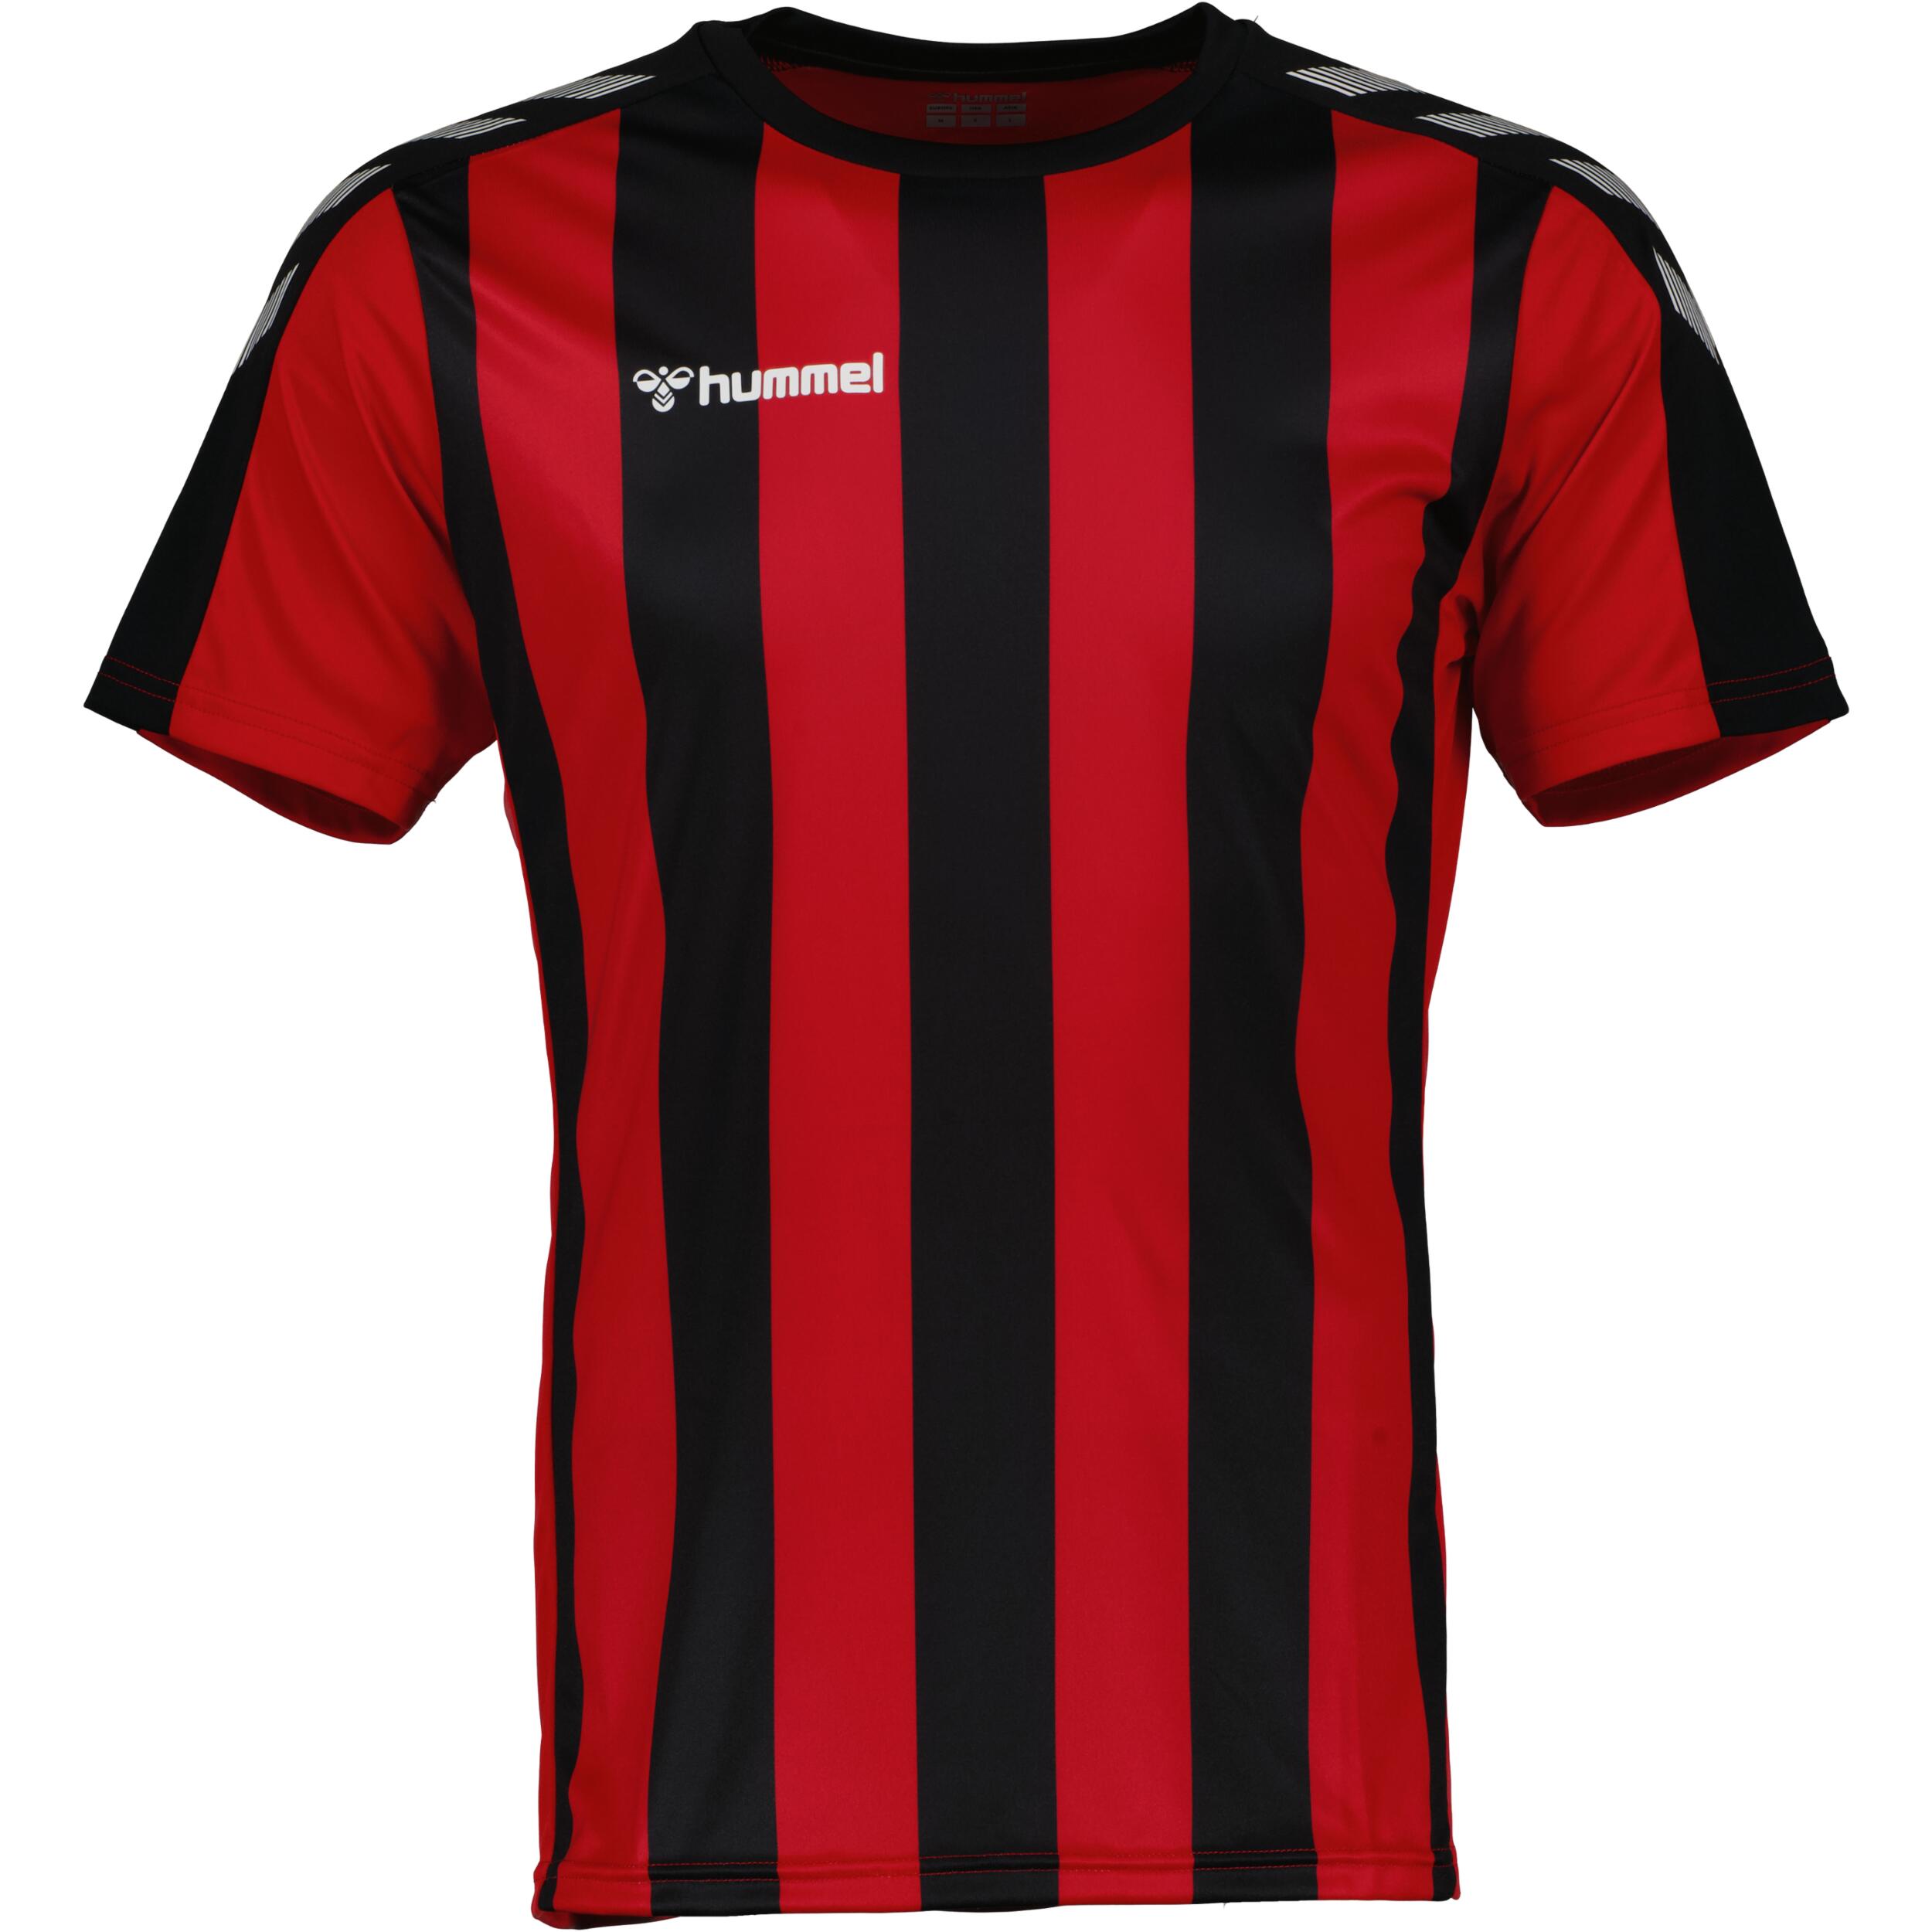 Stripe jersey for kids, great for football, in true red/black 1/3